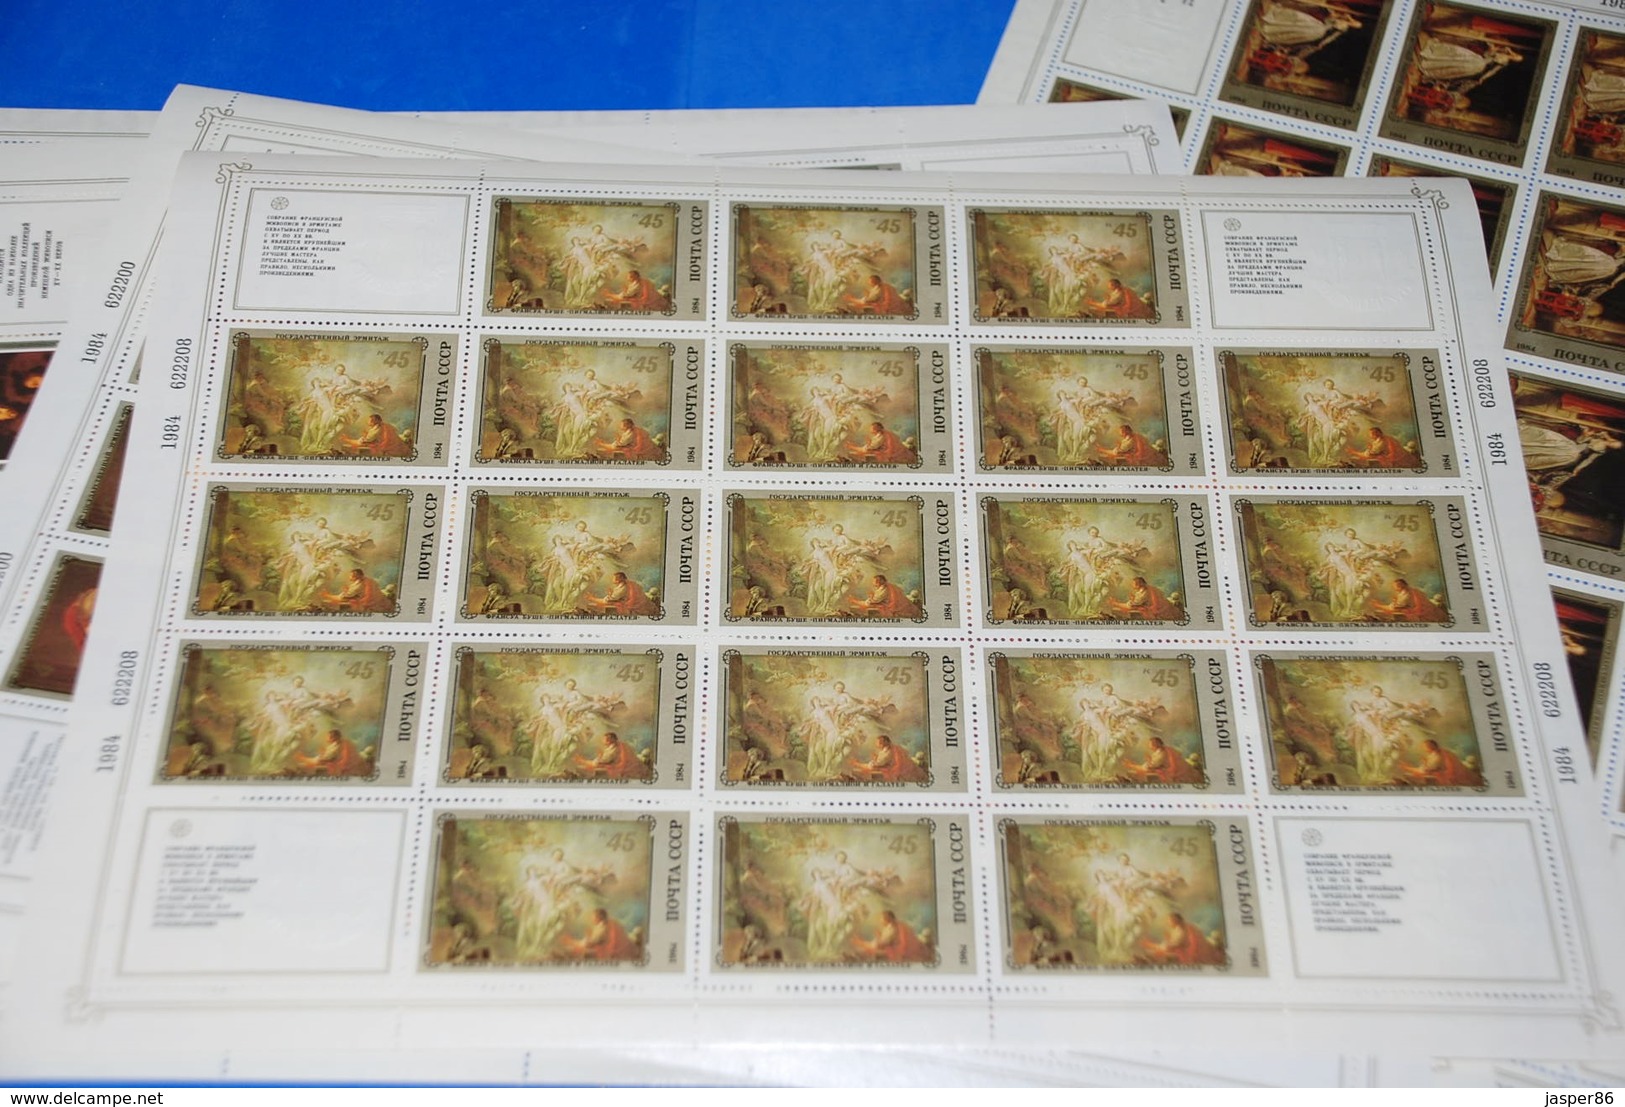 Hermitage Painting - Germany France England - 6 x MNH VF Full Sheets, Russia